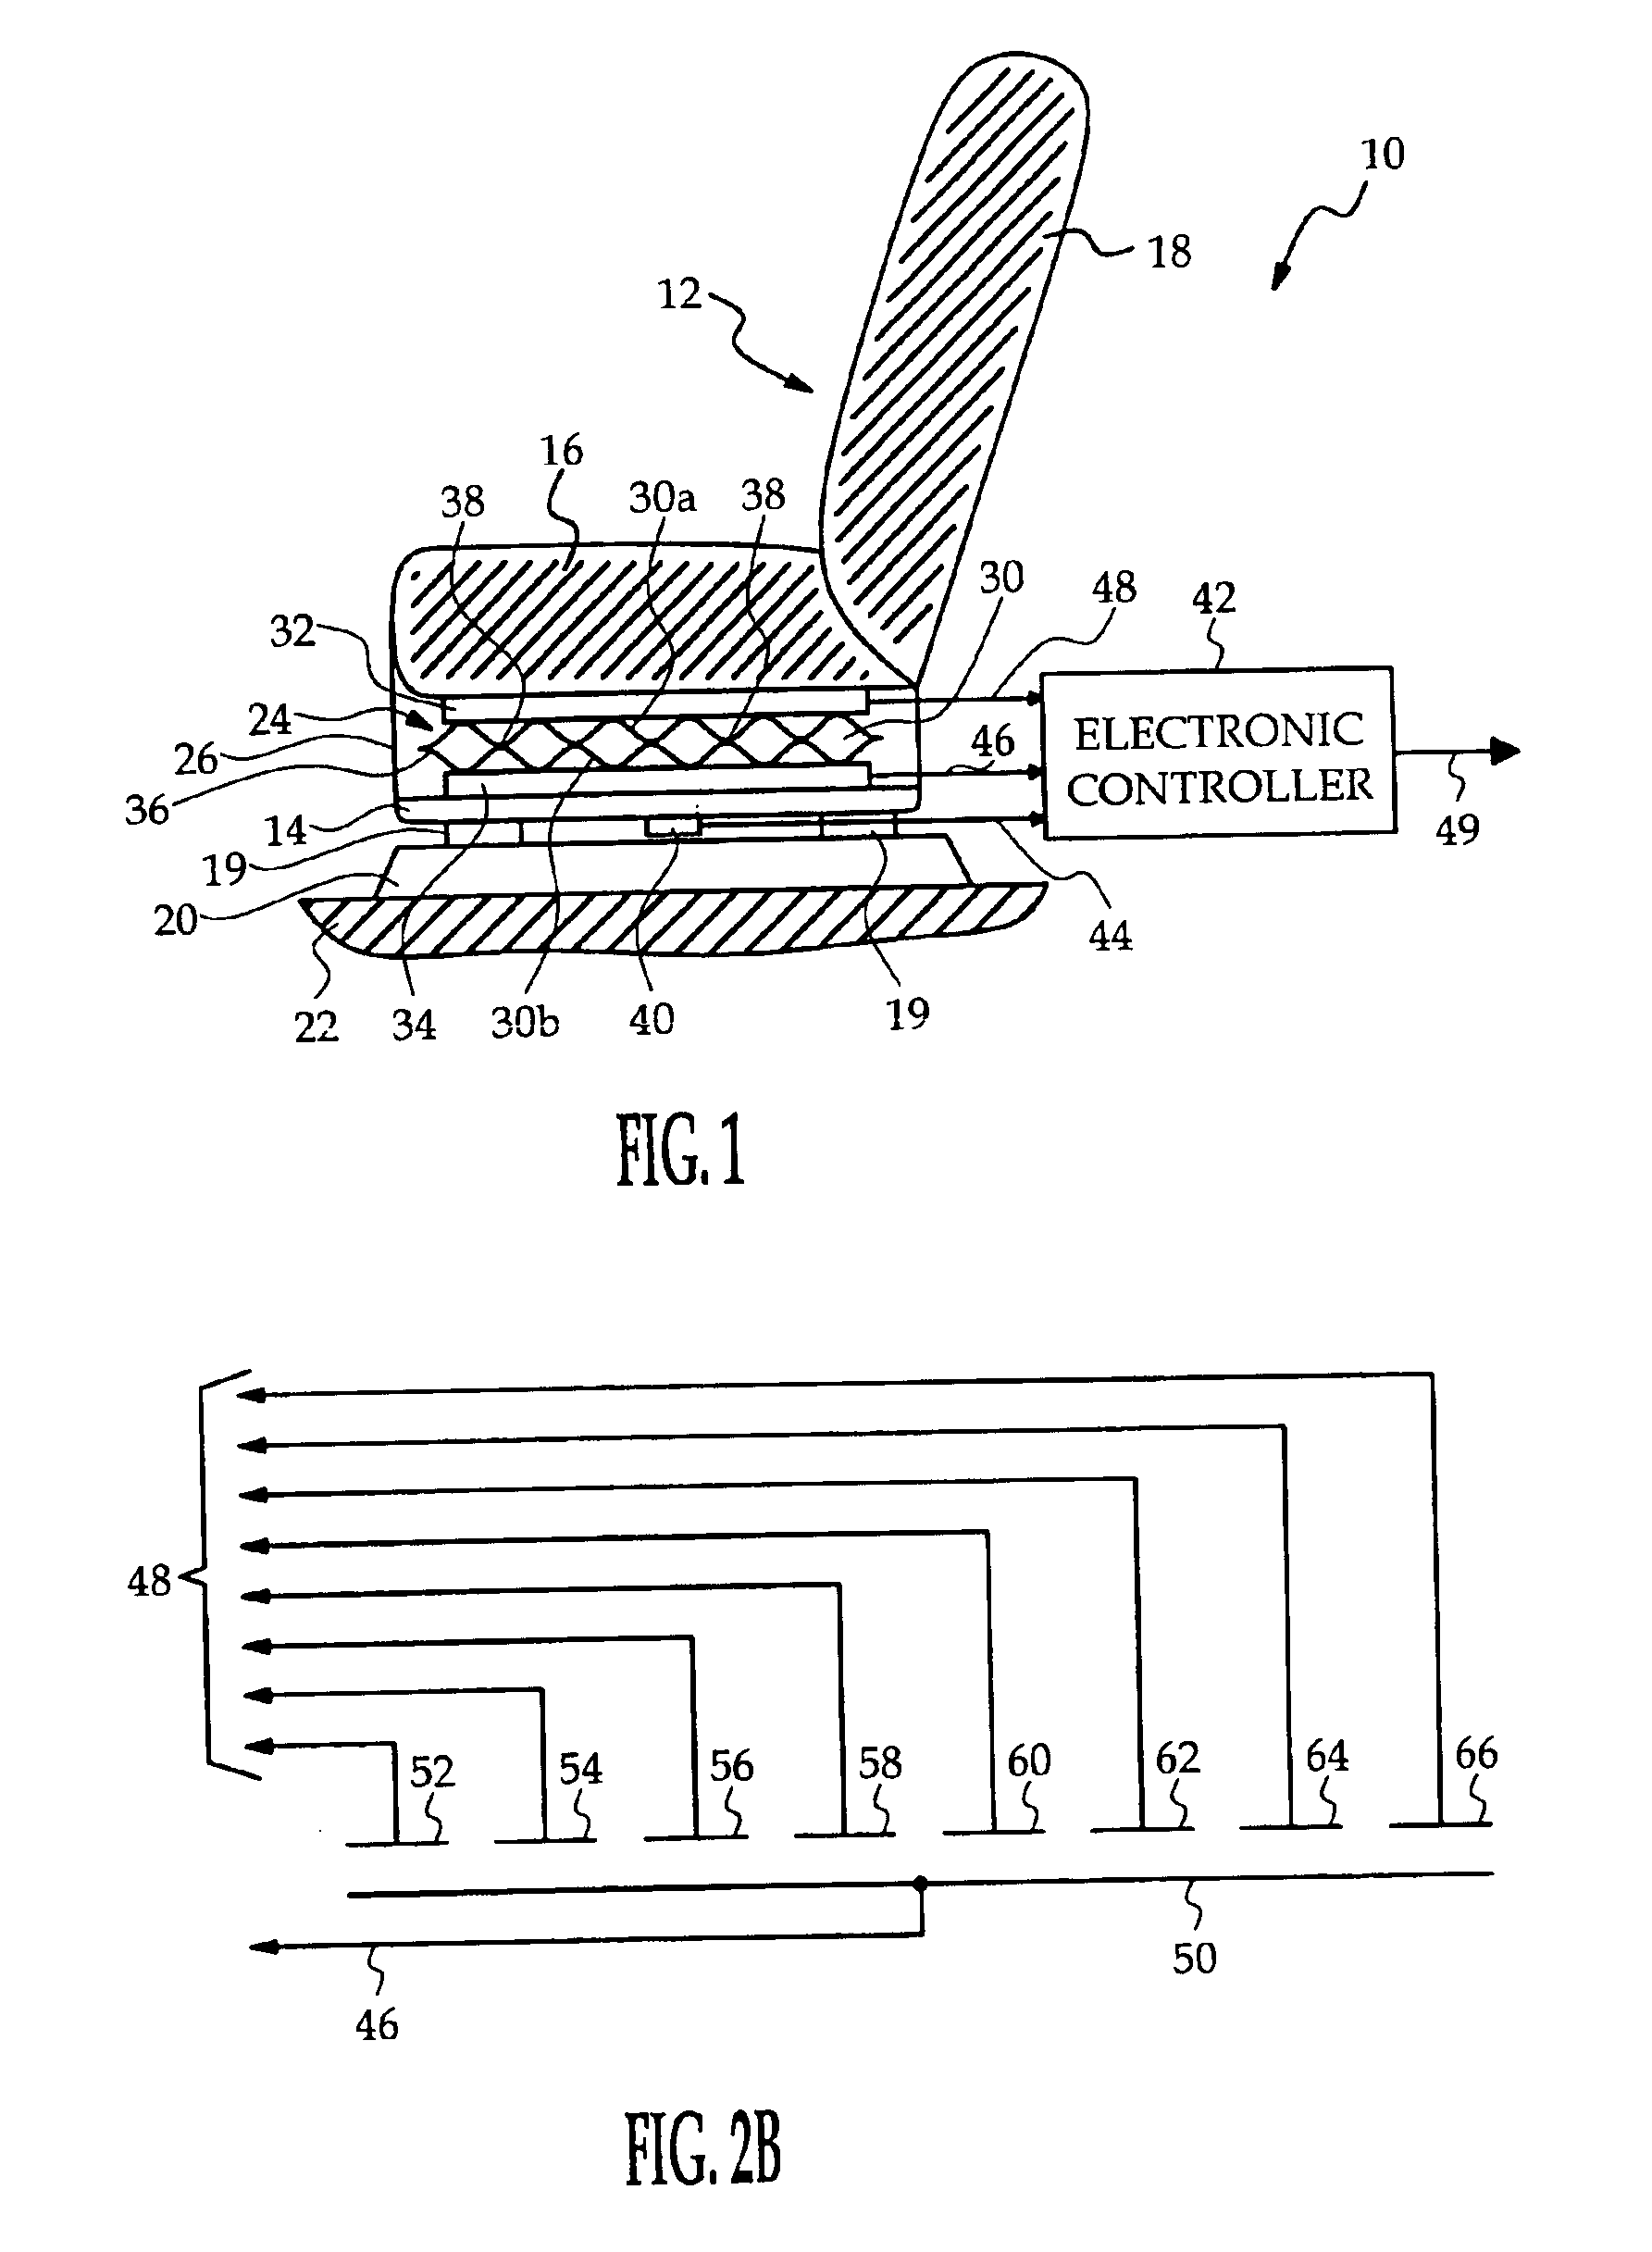 Fluid filled seat bladder with capacitive sensors for occupant classification and weight estimation